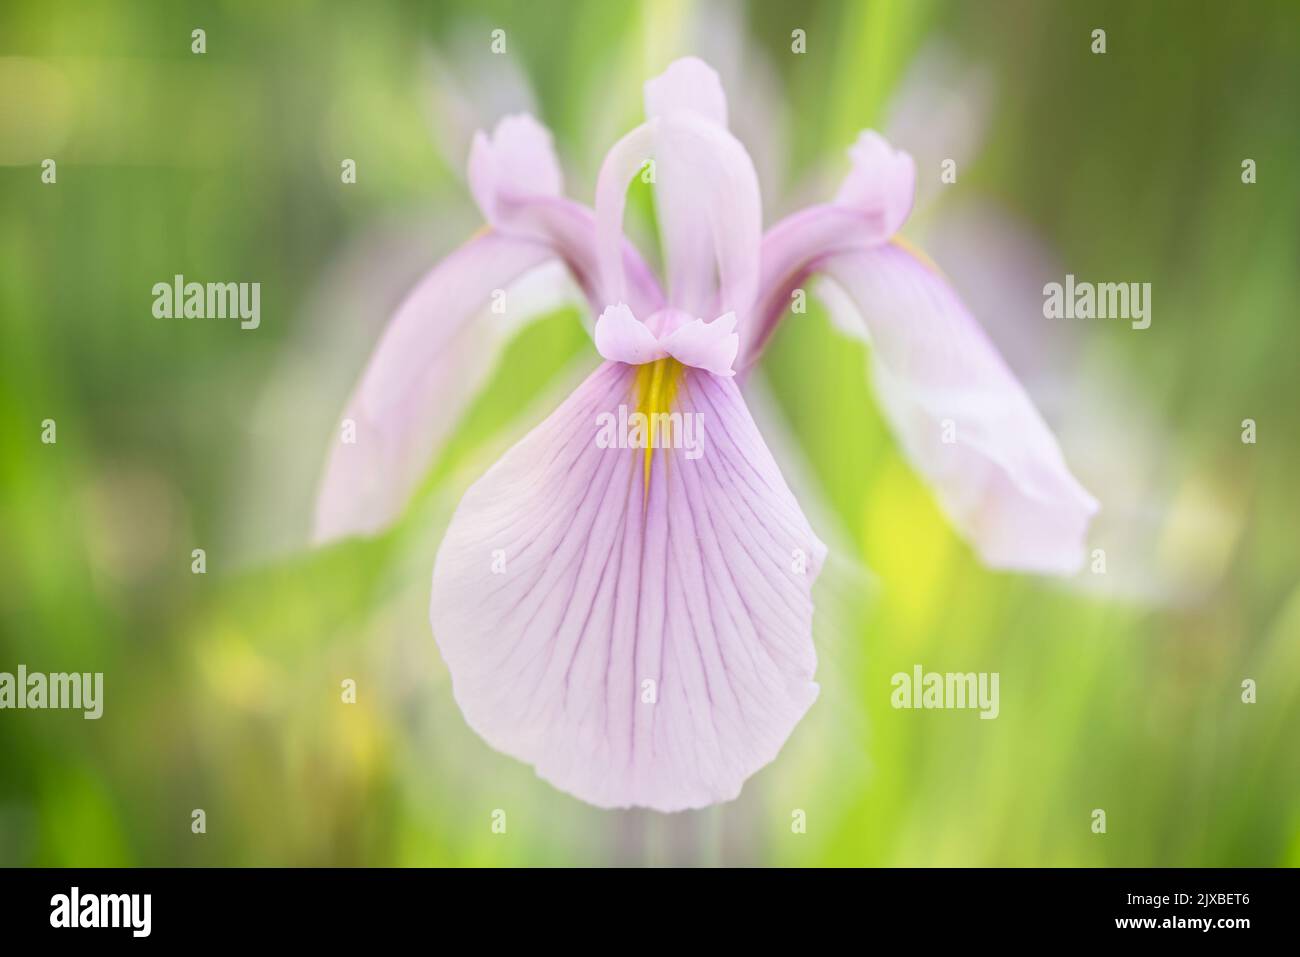 Dreamy pink Siberian Iris flower 'Pink Haze' macro on blurred background. Flower petals are light pink purple with white and yellow markings. Stock Photo